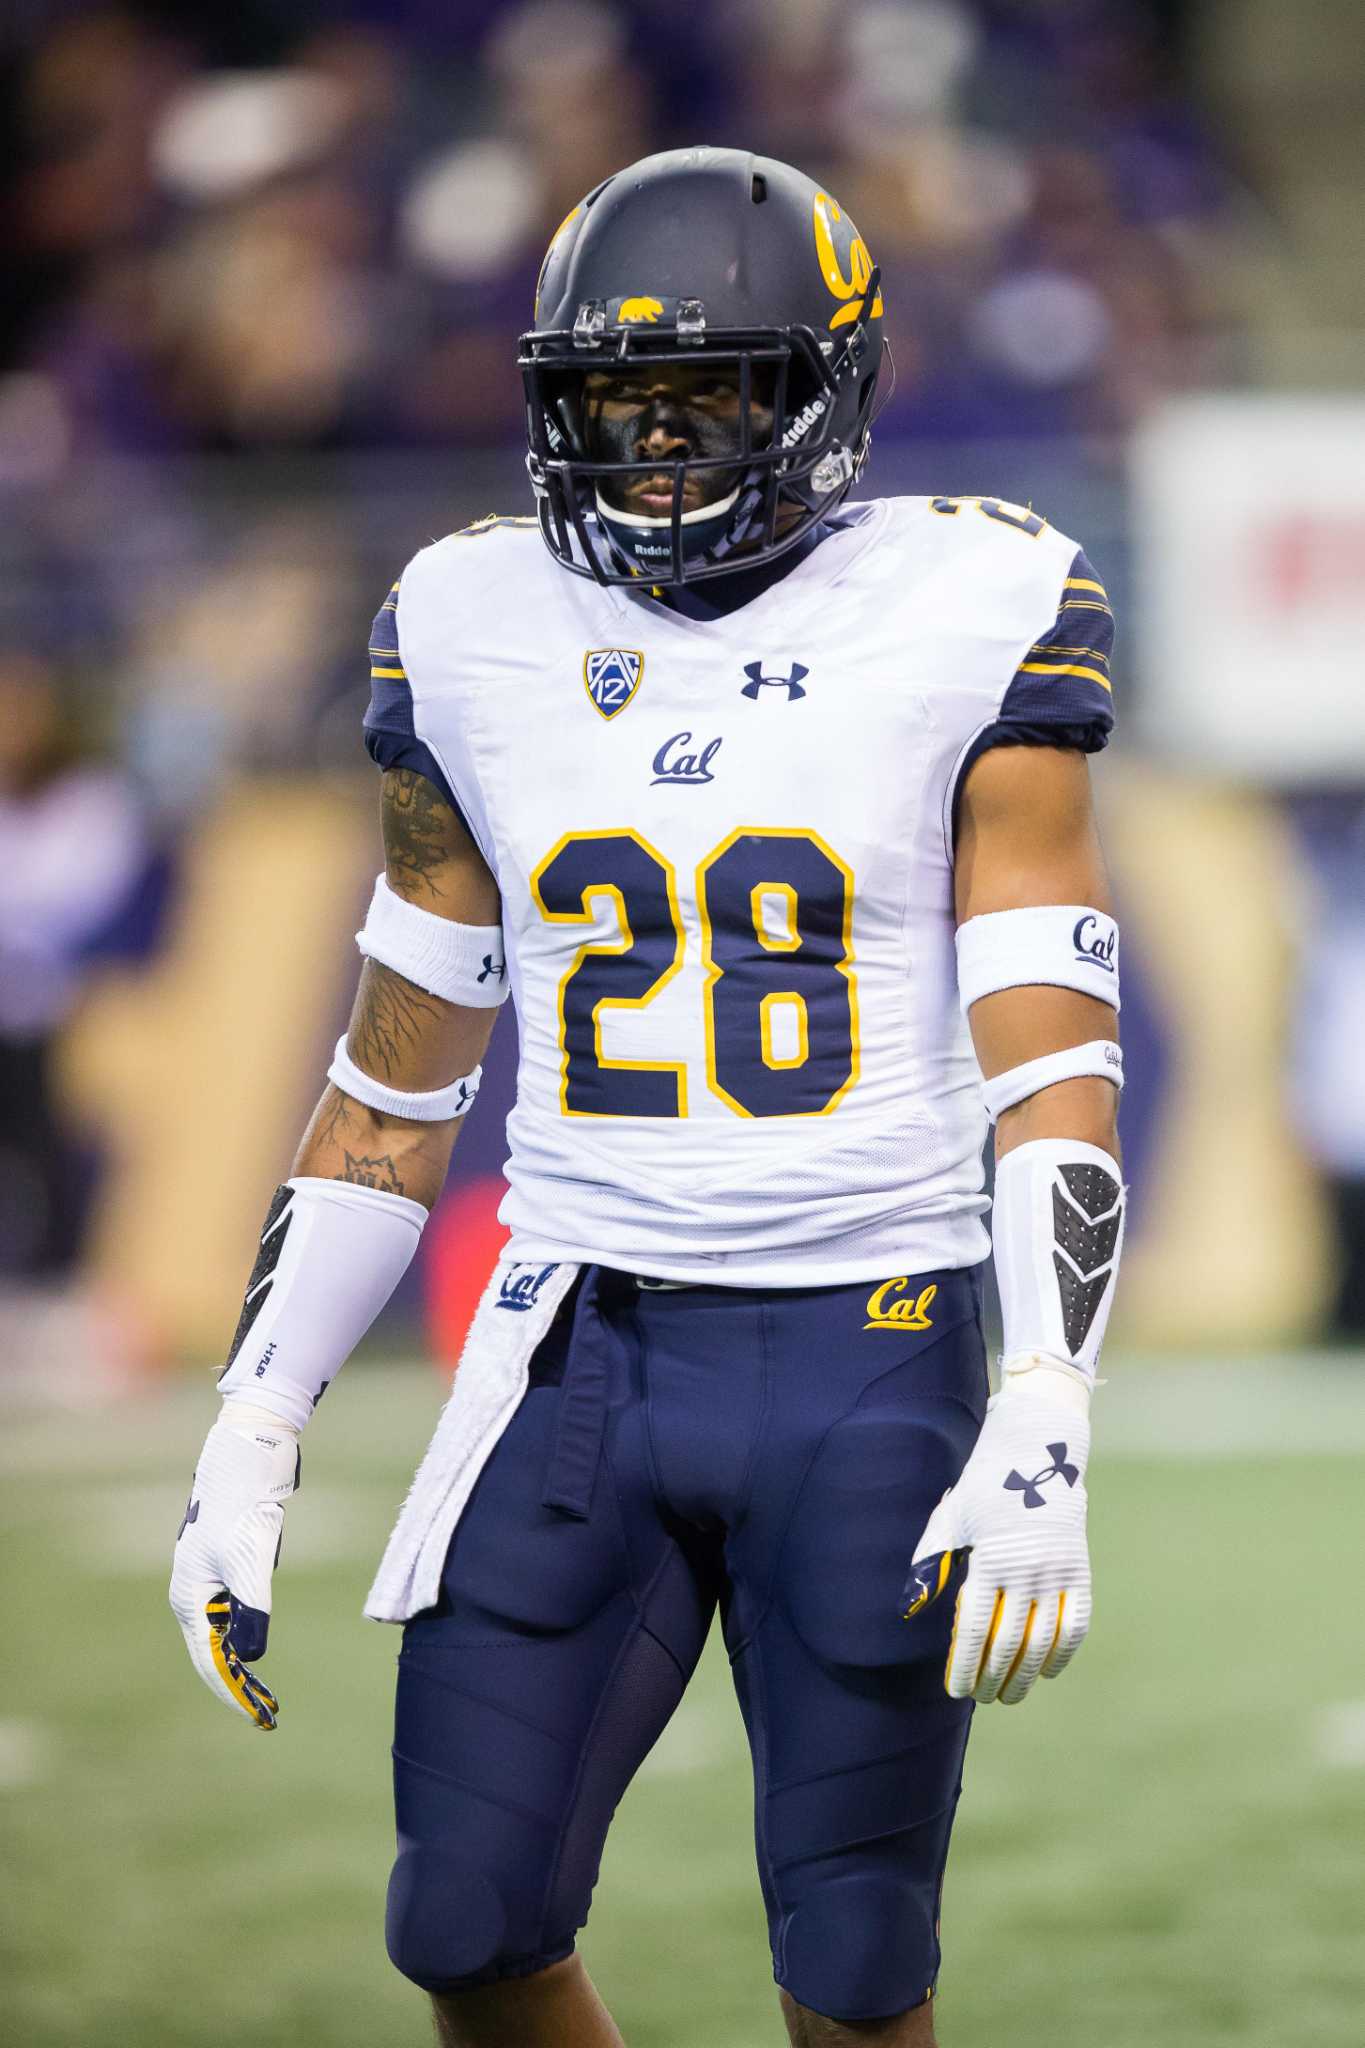 Cal preview: Defense sets expectations high